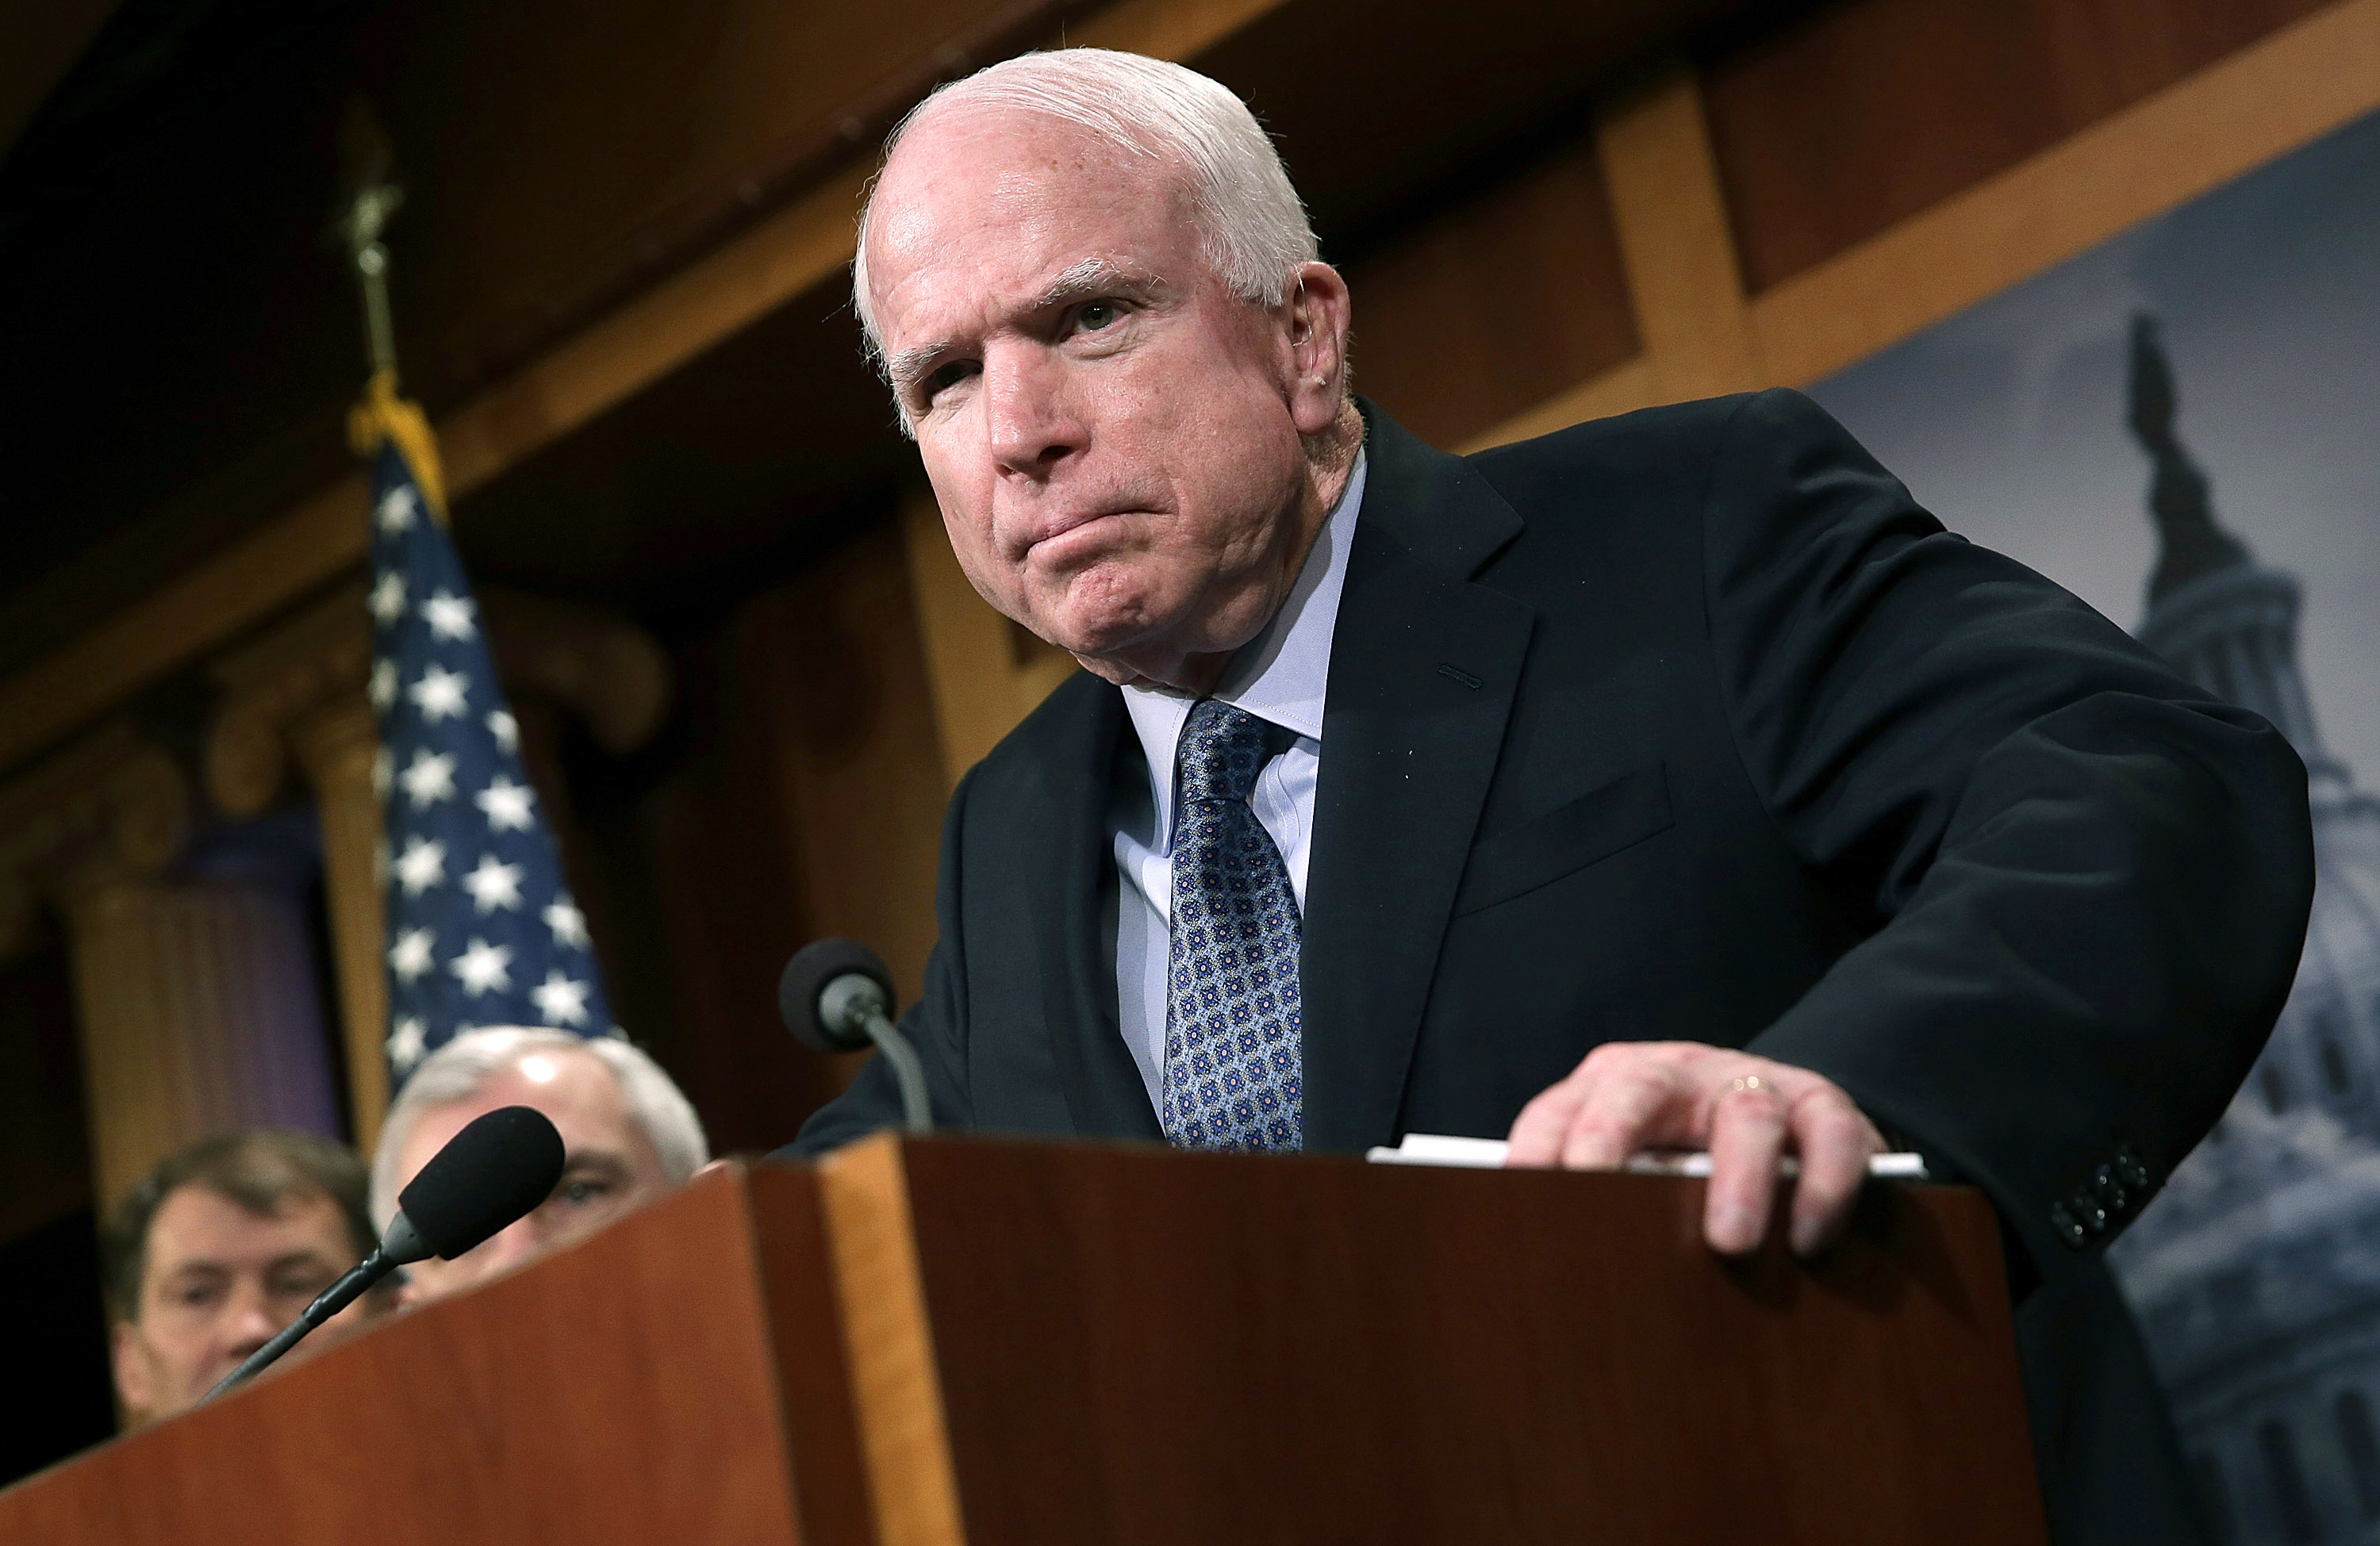 Sen. John McCain (R-AZ) speaks during a press conference at the U.S. Capitol February 5, 2015 in Washington, DC. (Win McNamee—Getty Images)